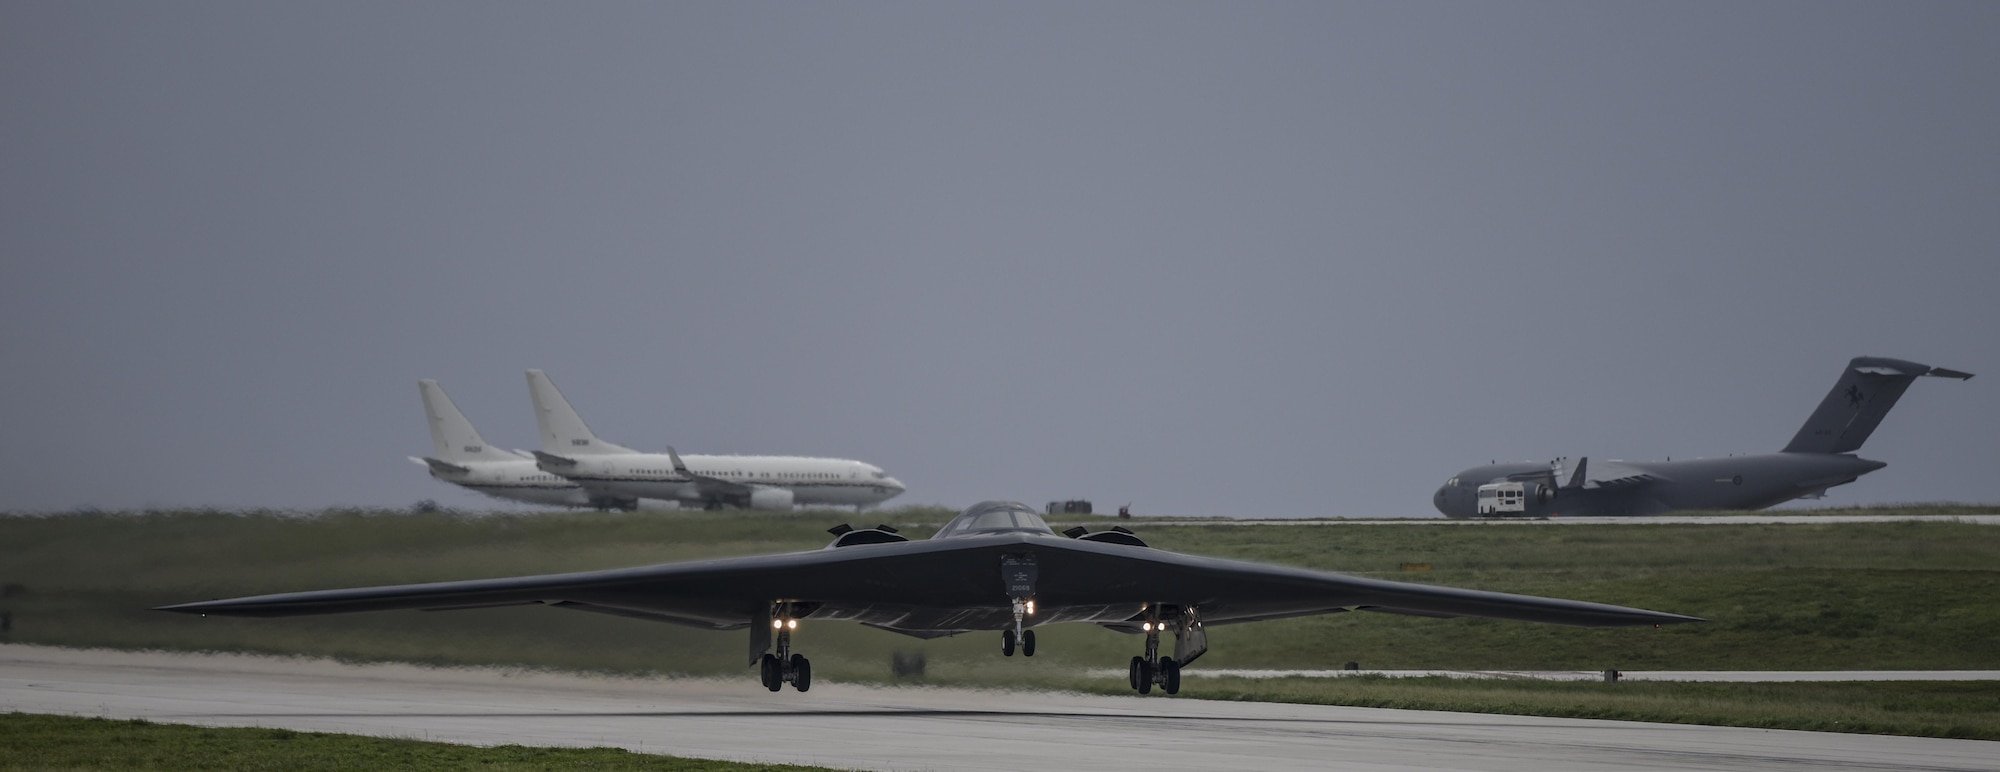 A U.S. Air Force B-2 Spirit takes off at Andersen Air Force Base, Guam, for an integrated bomber operation Aug.17, 2016. This mission marks the first time in history that all three of Air Force Global Strike Command's strategic bomber aircraft are simultaneously conducting integrated operations in the U.S. Pacific Command area of operations. As of Aug. 15, the B-1 Lancer will be temporarily deployed to Guam in support of U.S. Pacific Command's Continuous Bomber Presence mission. (U.S. Air Force photo by Tech Sgt Richard P. Ebensberger/Released)